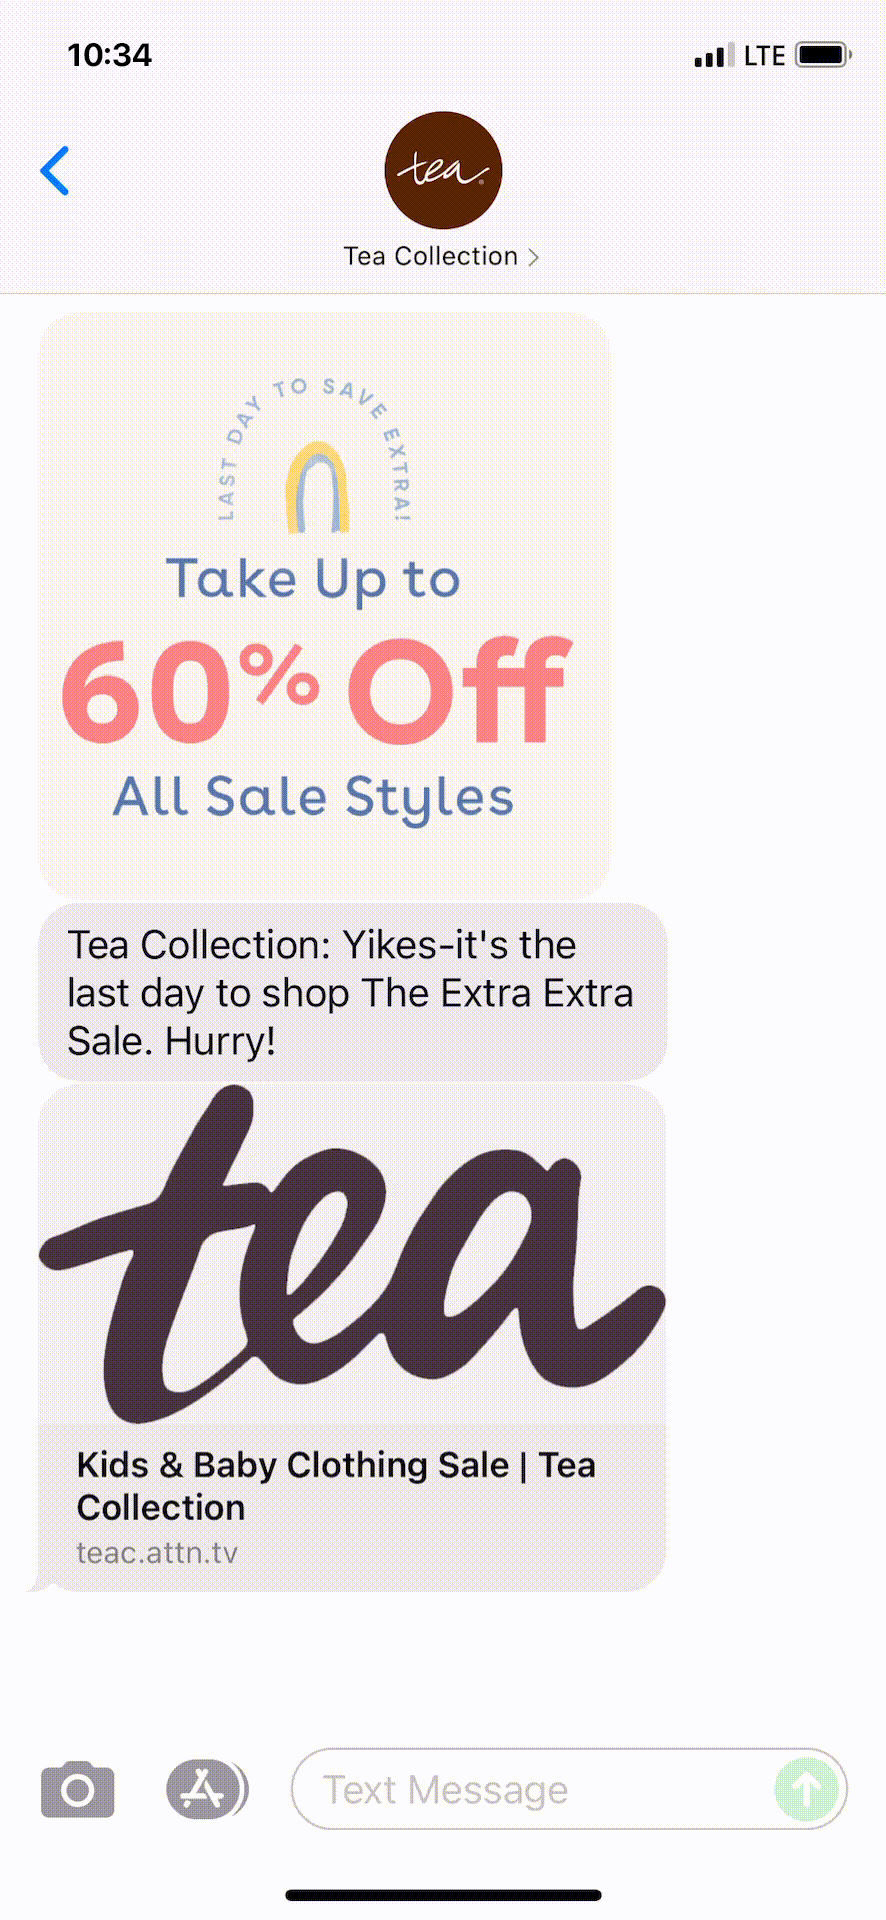 Tea-Collection-Text-Message-Marketing-Example-06.13.2021